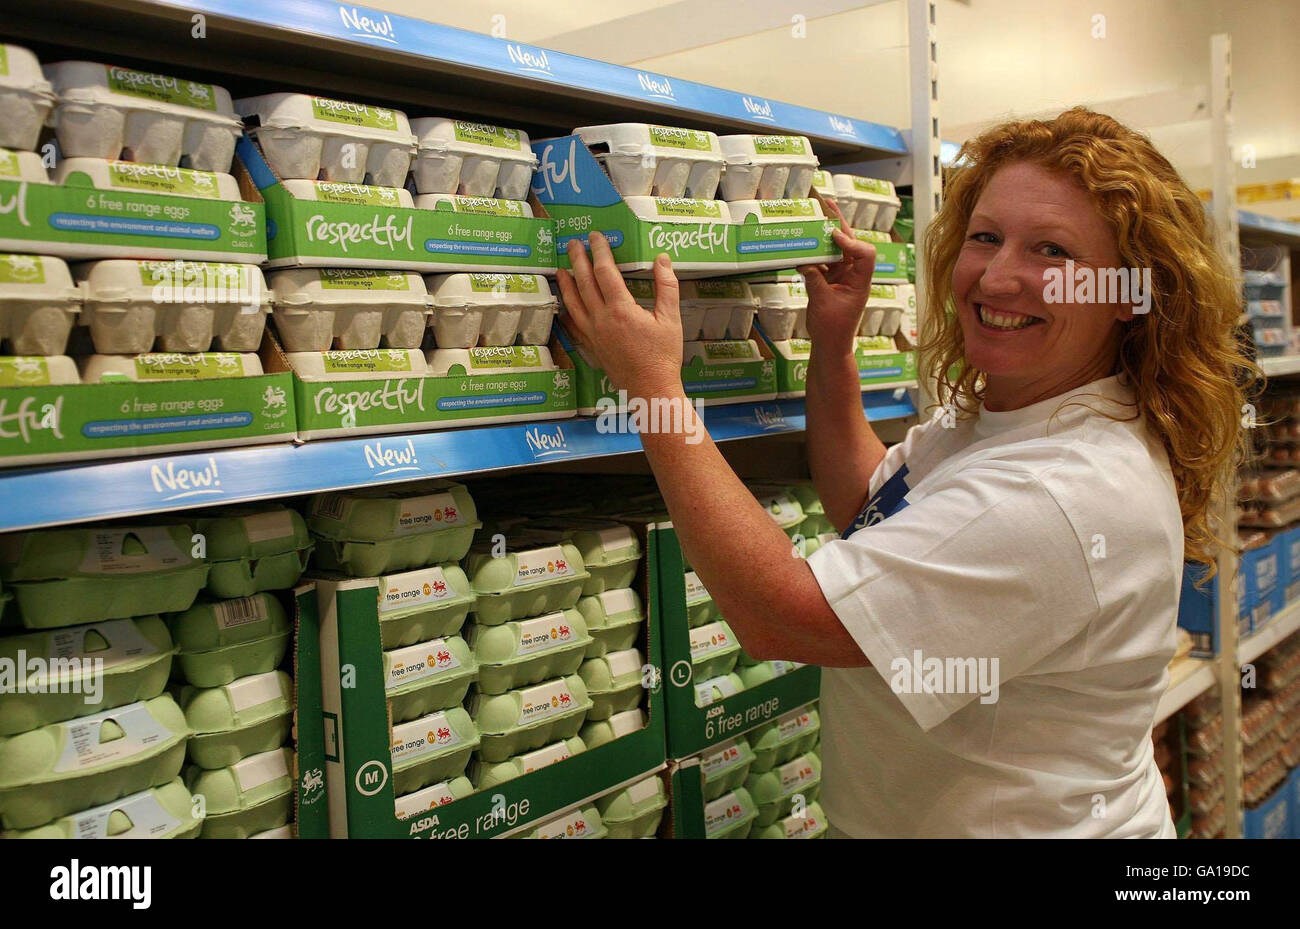 Charlie Dimmock stocks the shelves in Asda with Respectful Eggs, the World's First Low-Carbon supermarket eggs, at a store in London. Stock Photo